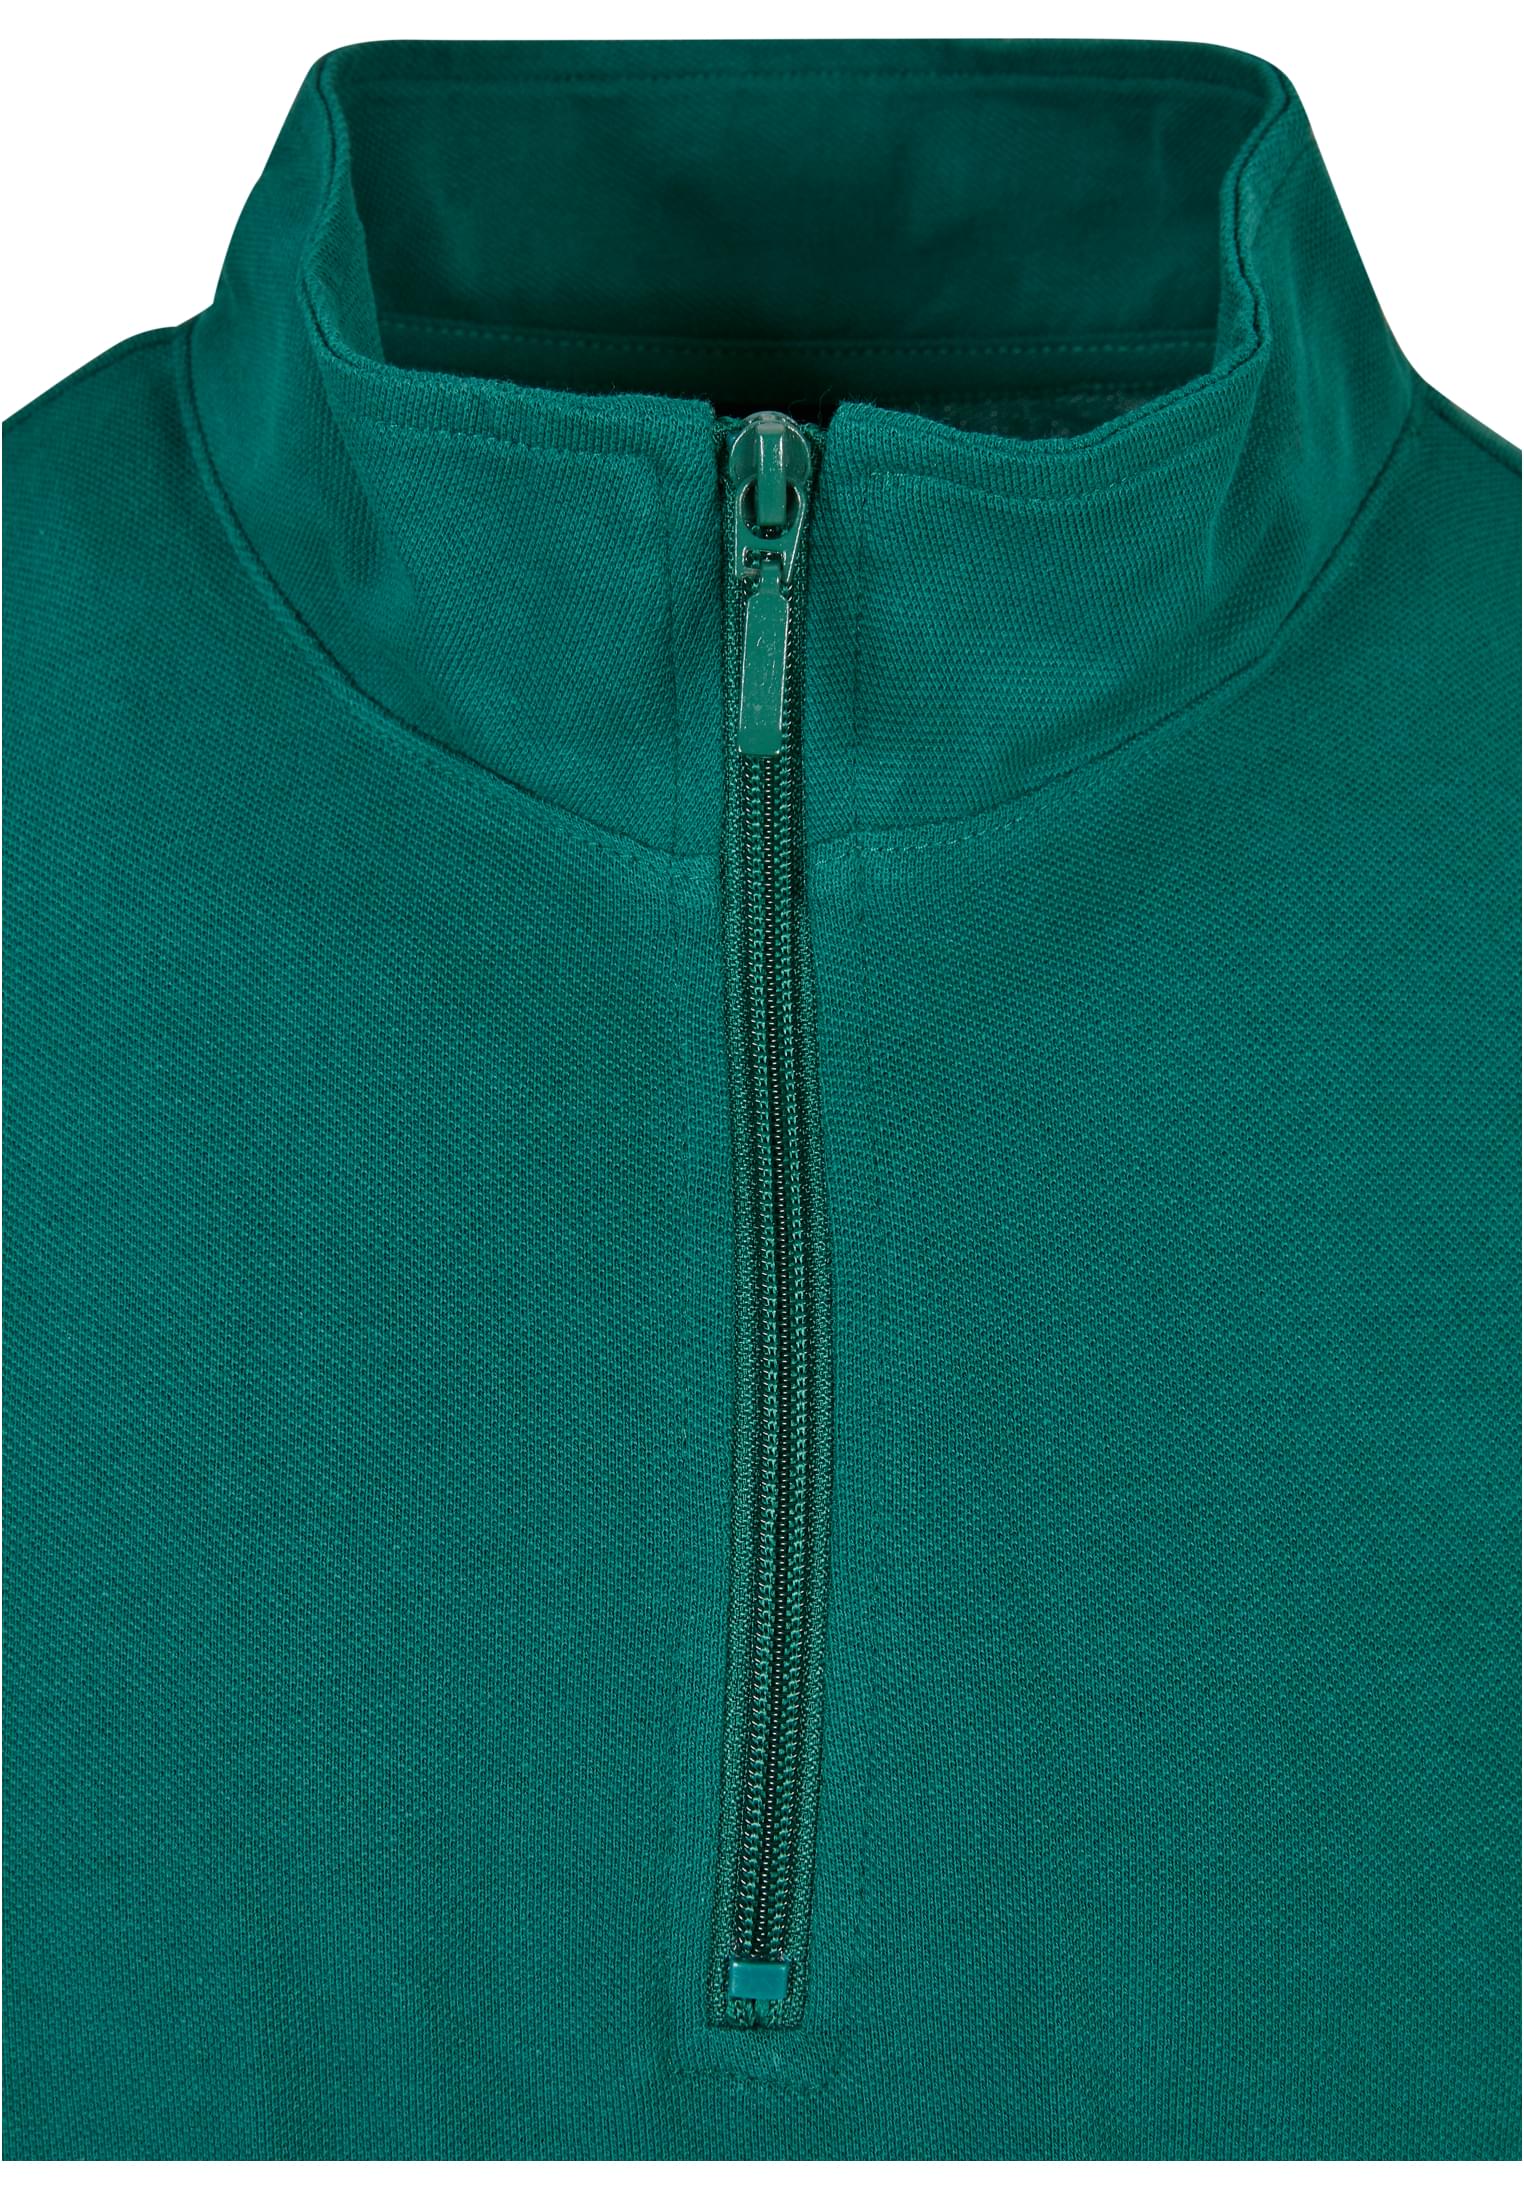 T-Shirts Boxy Zip Pique Tee in Farbe green